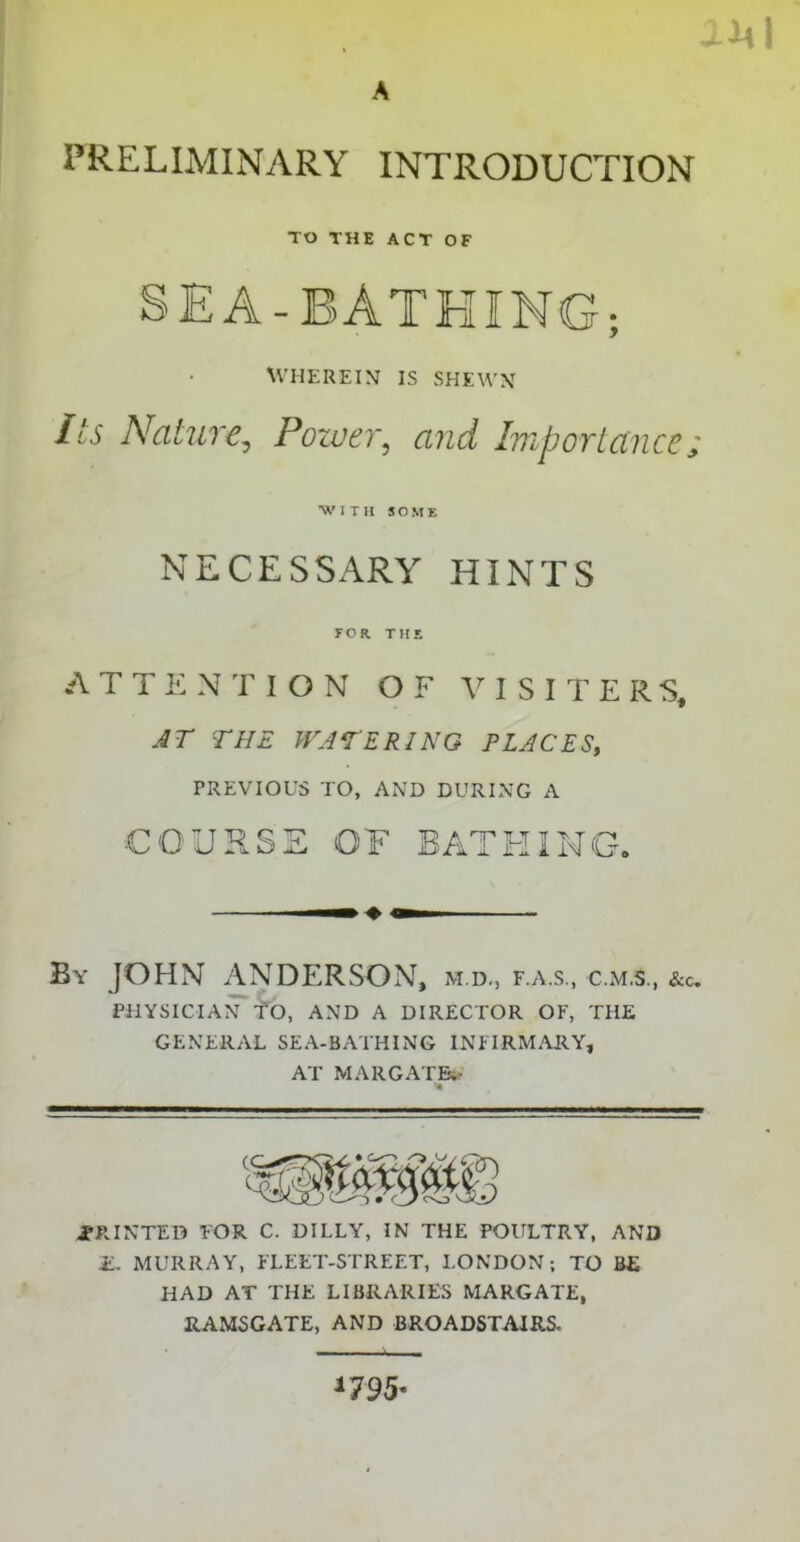 AMI A PRELIMINARY INTRODUCTION TO THE ACT OF SEA-BATHING; WHEREIN IS SHEWN Its Nature, Power, and Importance; 'WITH SOME NECESSARY HINTS FOR THE ATTENTION OF VISITERS, AT THE WATERING PLACES, PREVIOUS TO, AND DURING A COURSE OF BATHING. By JOHN ANDERSON, m.d., f.a.s., c.m.s., &c. PHYSICIAN TO, AND A DIRECTOR OF, THE GENERAL SEA-BATHING INFIRMARY, AT MARGATE.- % .PRINTED FOR C. DILLY, IN THE POULTRY, AND E. MURRAY, FLEET-STREET, LONDON; TO BE HAD AT THE LIBRARIES MARGATE, RAMSGATE, AND BROADSTAIRS. *7 95